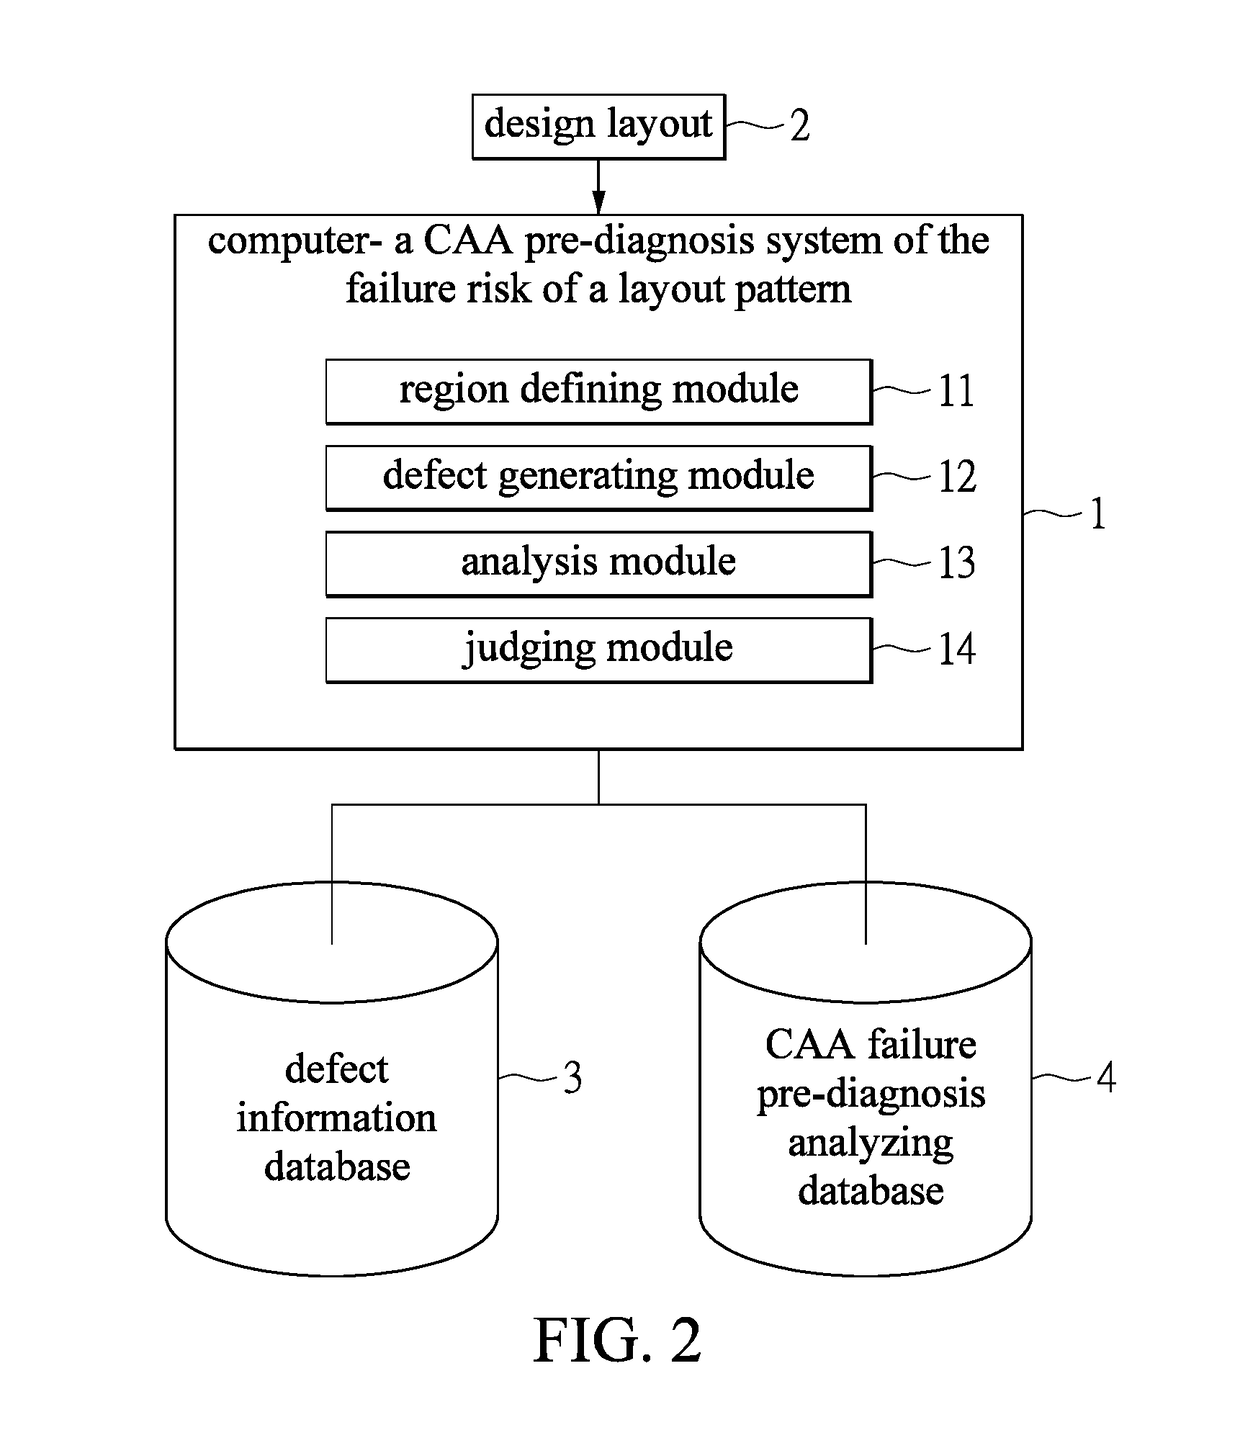 Intelligent caa failure pre-diagnosis method and system for design layout